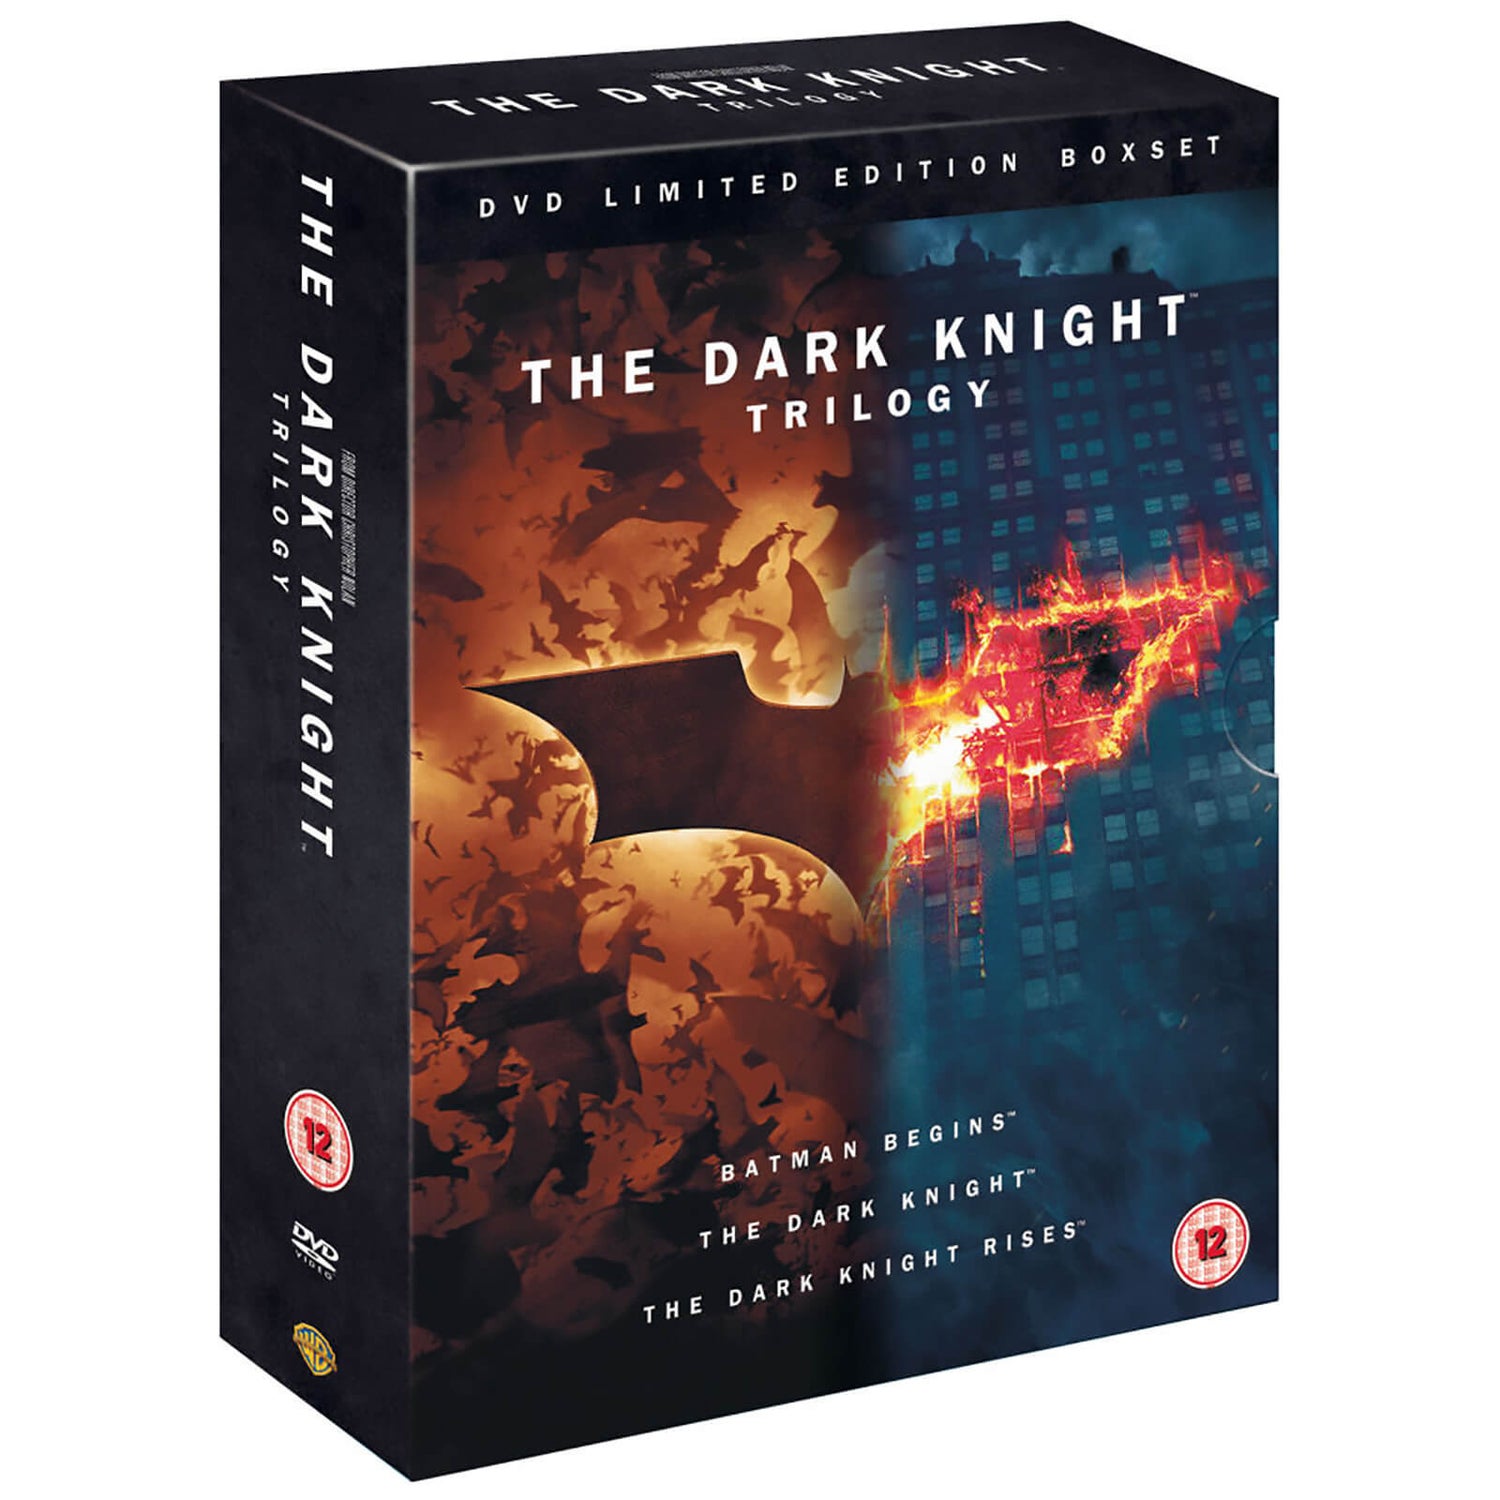 The Dark Knight Trilogy (Includes UltraViolet Copy)